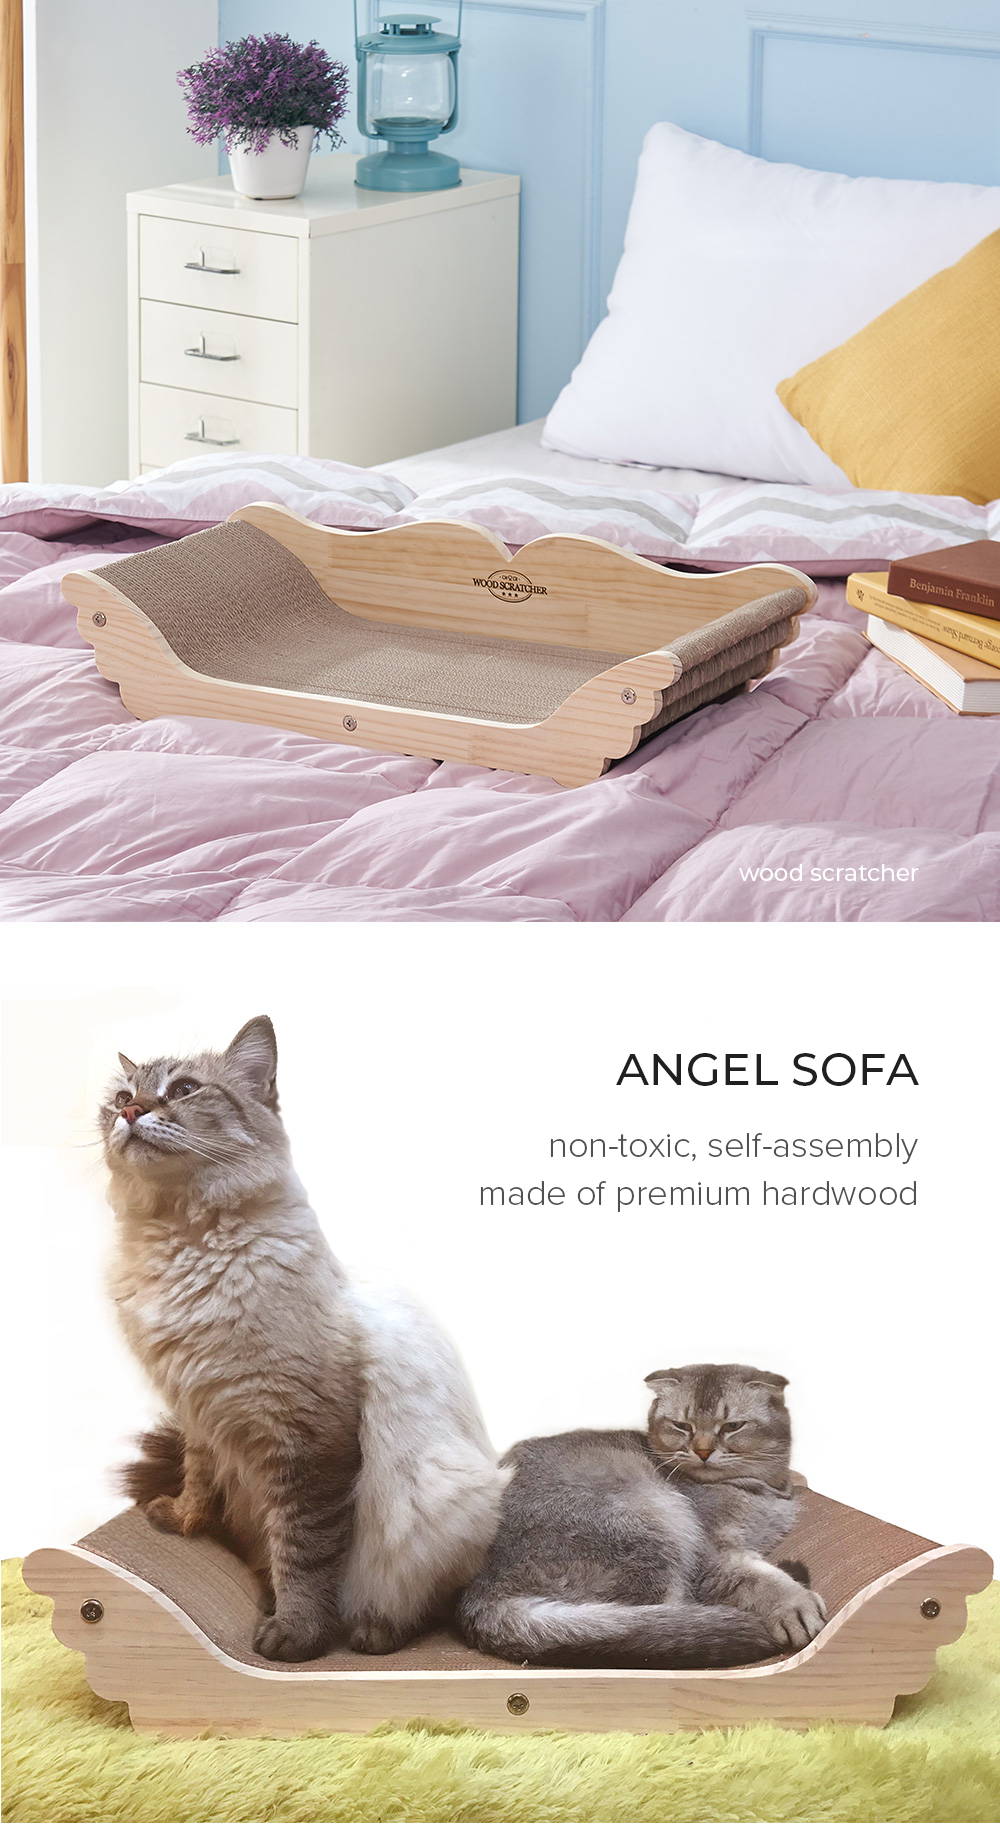 yaomi, cat scratcher, angel sofa scratcher, real hard wood cat scratcher, premium hardwood cat scratcher, replaceable hardwood cat scratcher, replaceable corrugated cardboard, easy to refill, eco-friendly, environment-friendly, non-toxic, furniture design, protect home furniture, relaxing place, releasing stress, strong, high-quality, korean product